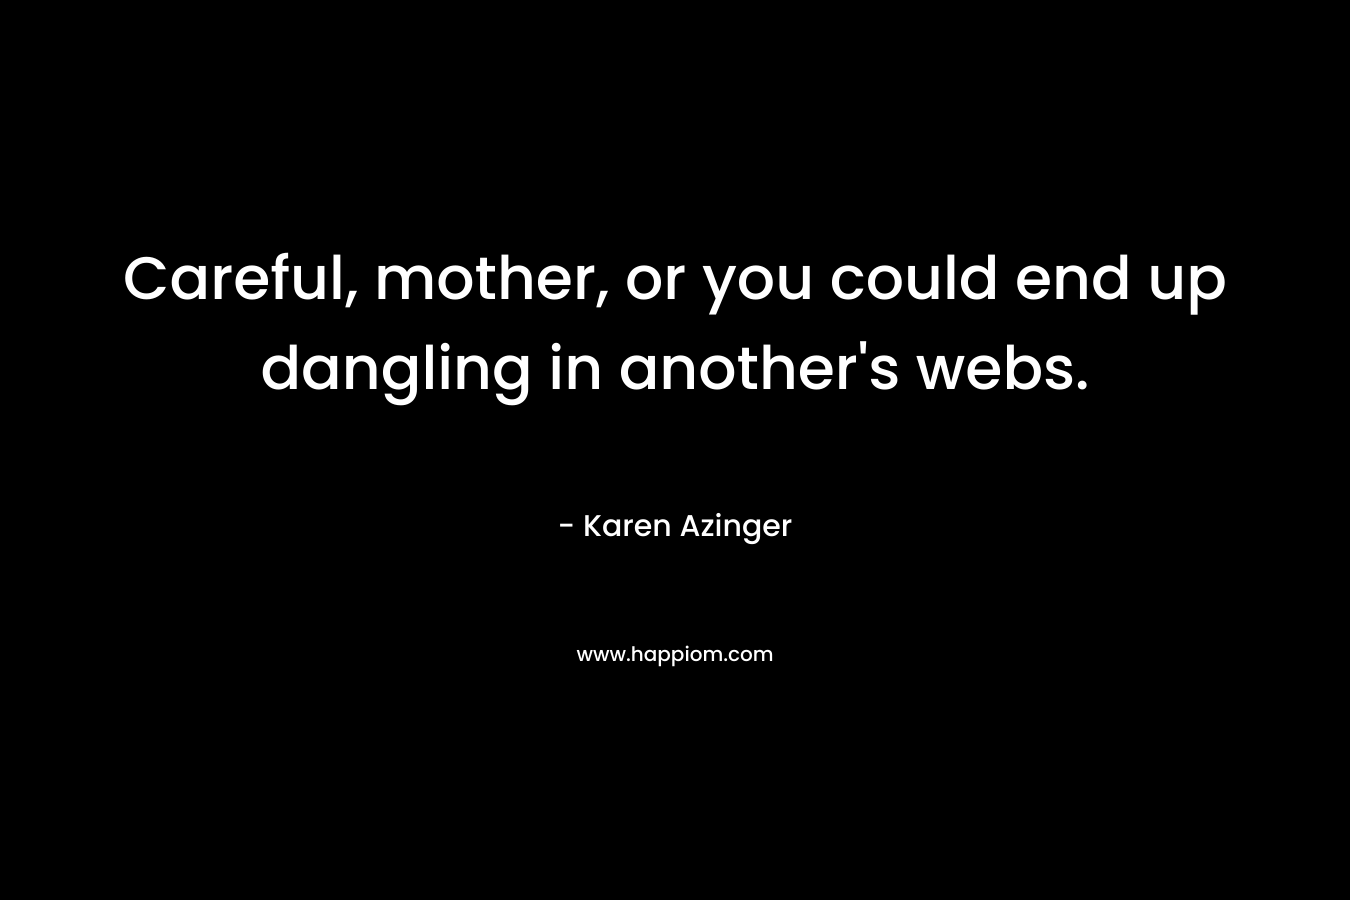 Careful, mother, or you could end up dangling in another’s webs. – Karen Azinger